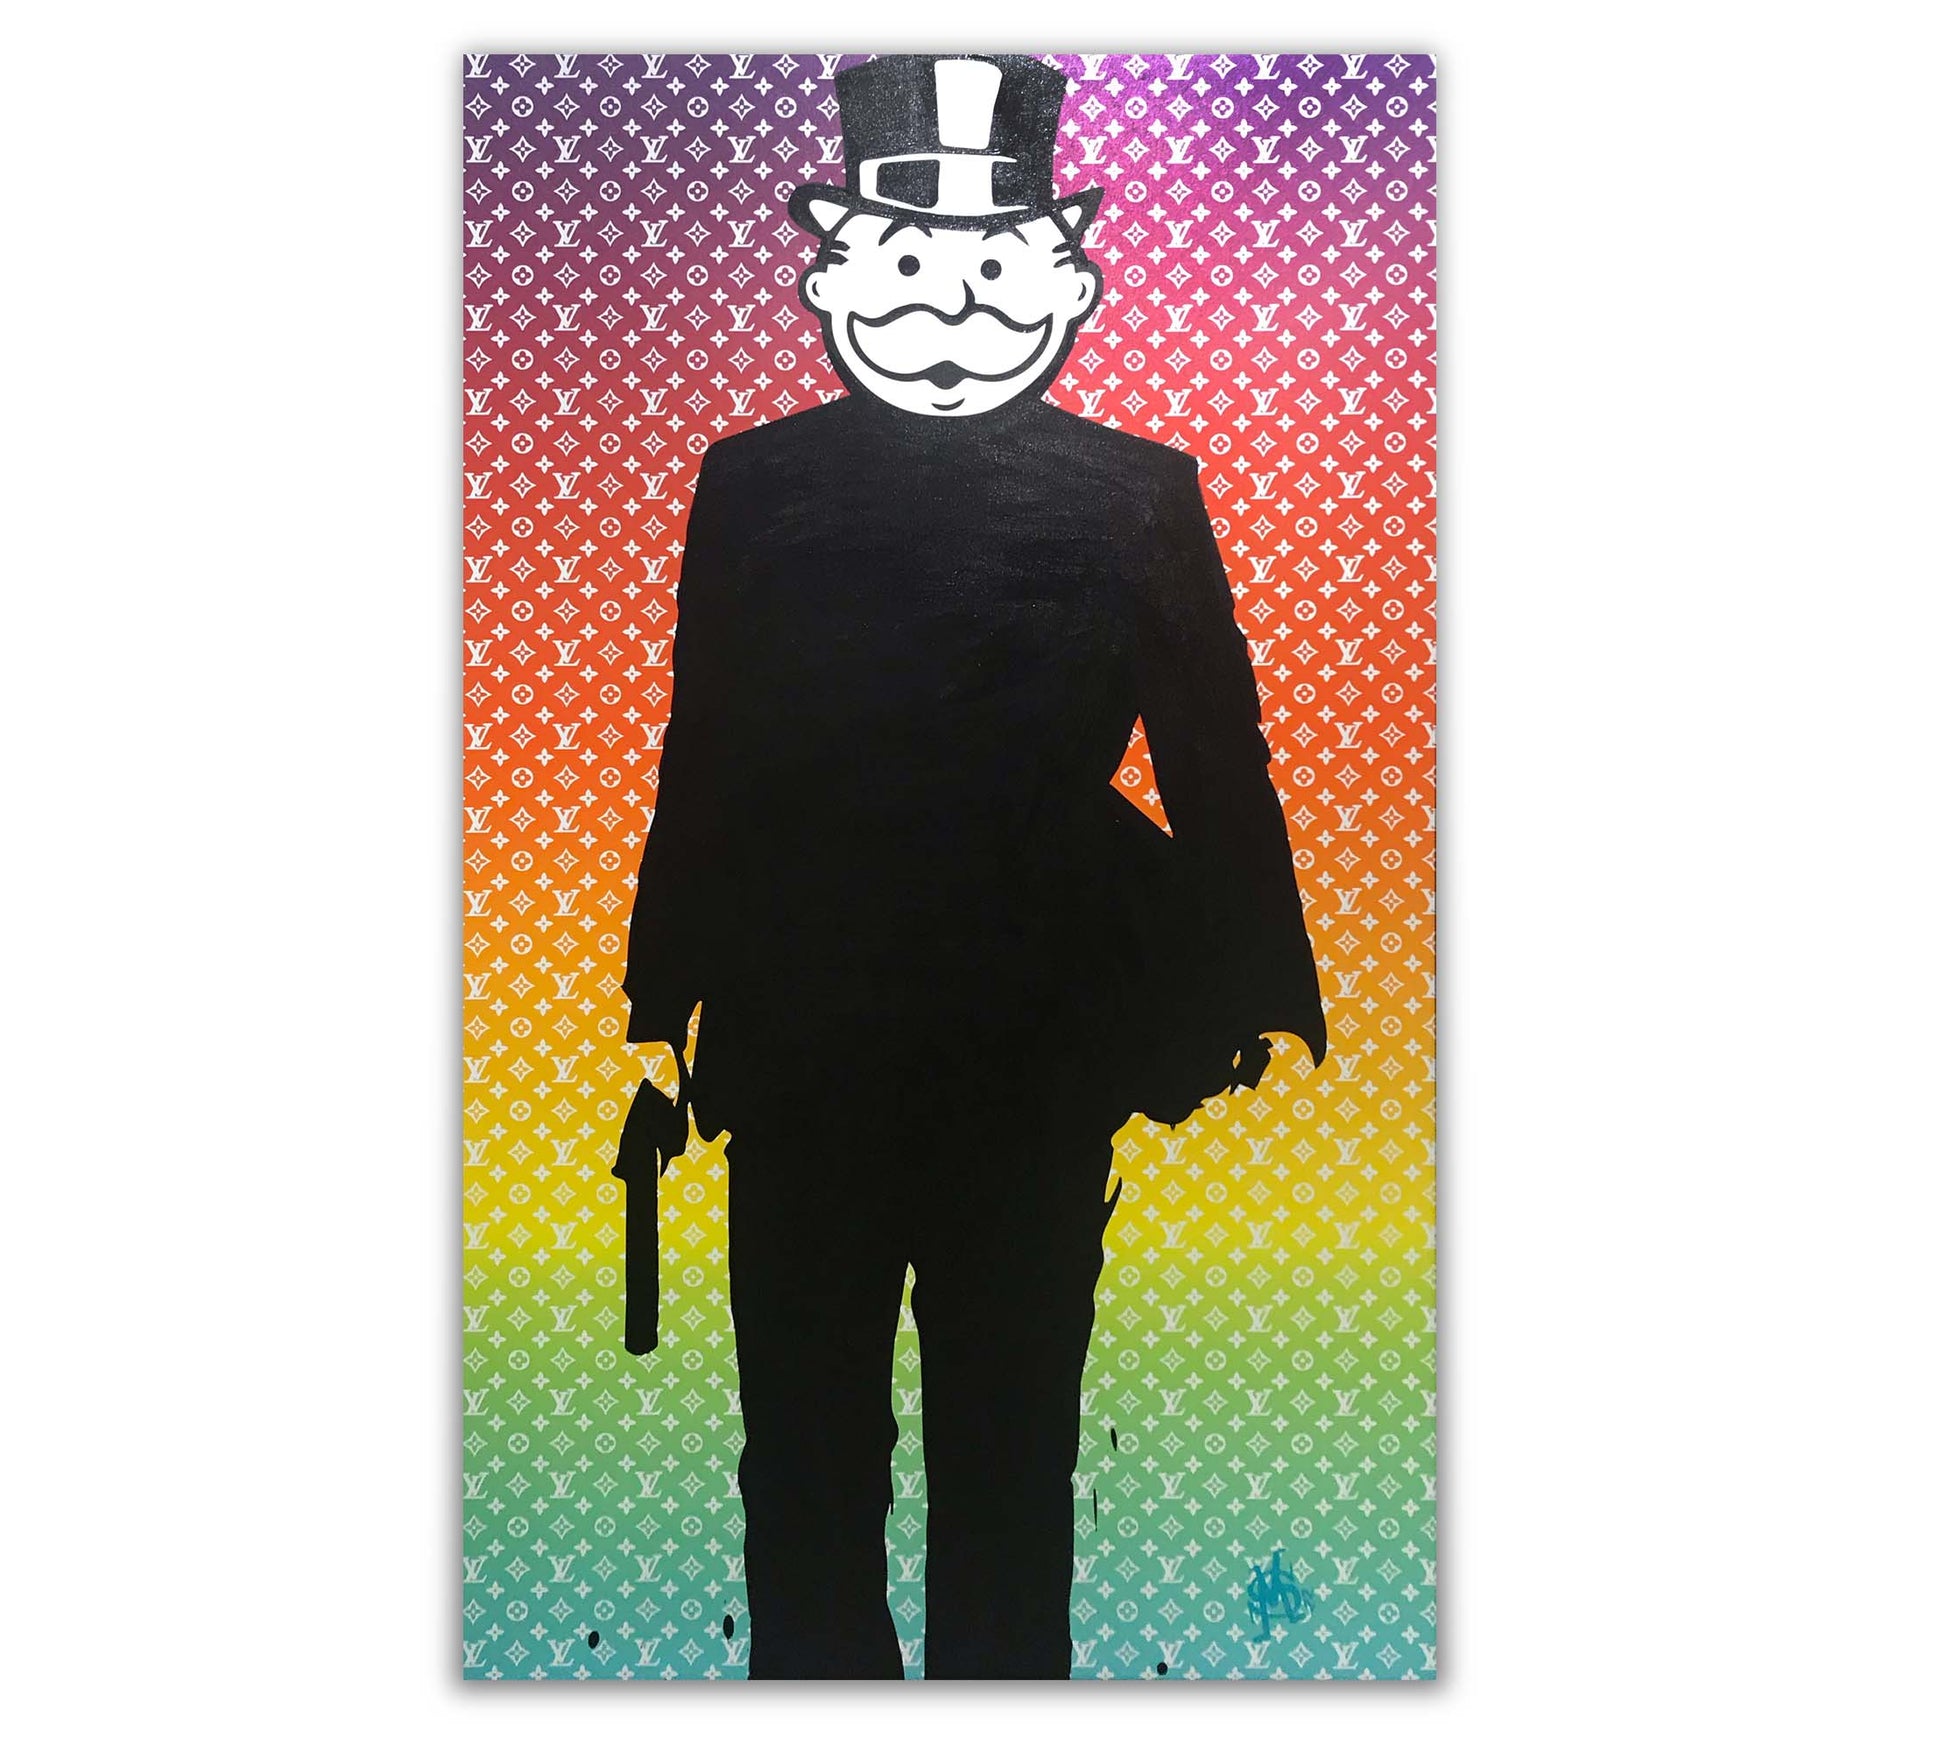 Sinister Monopoly "Louis" (Rainbow) Highlighted Paper Giclee